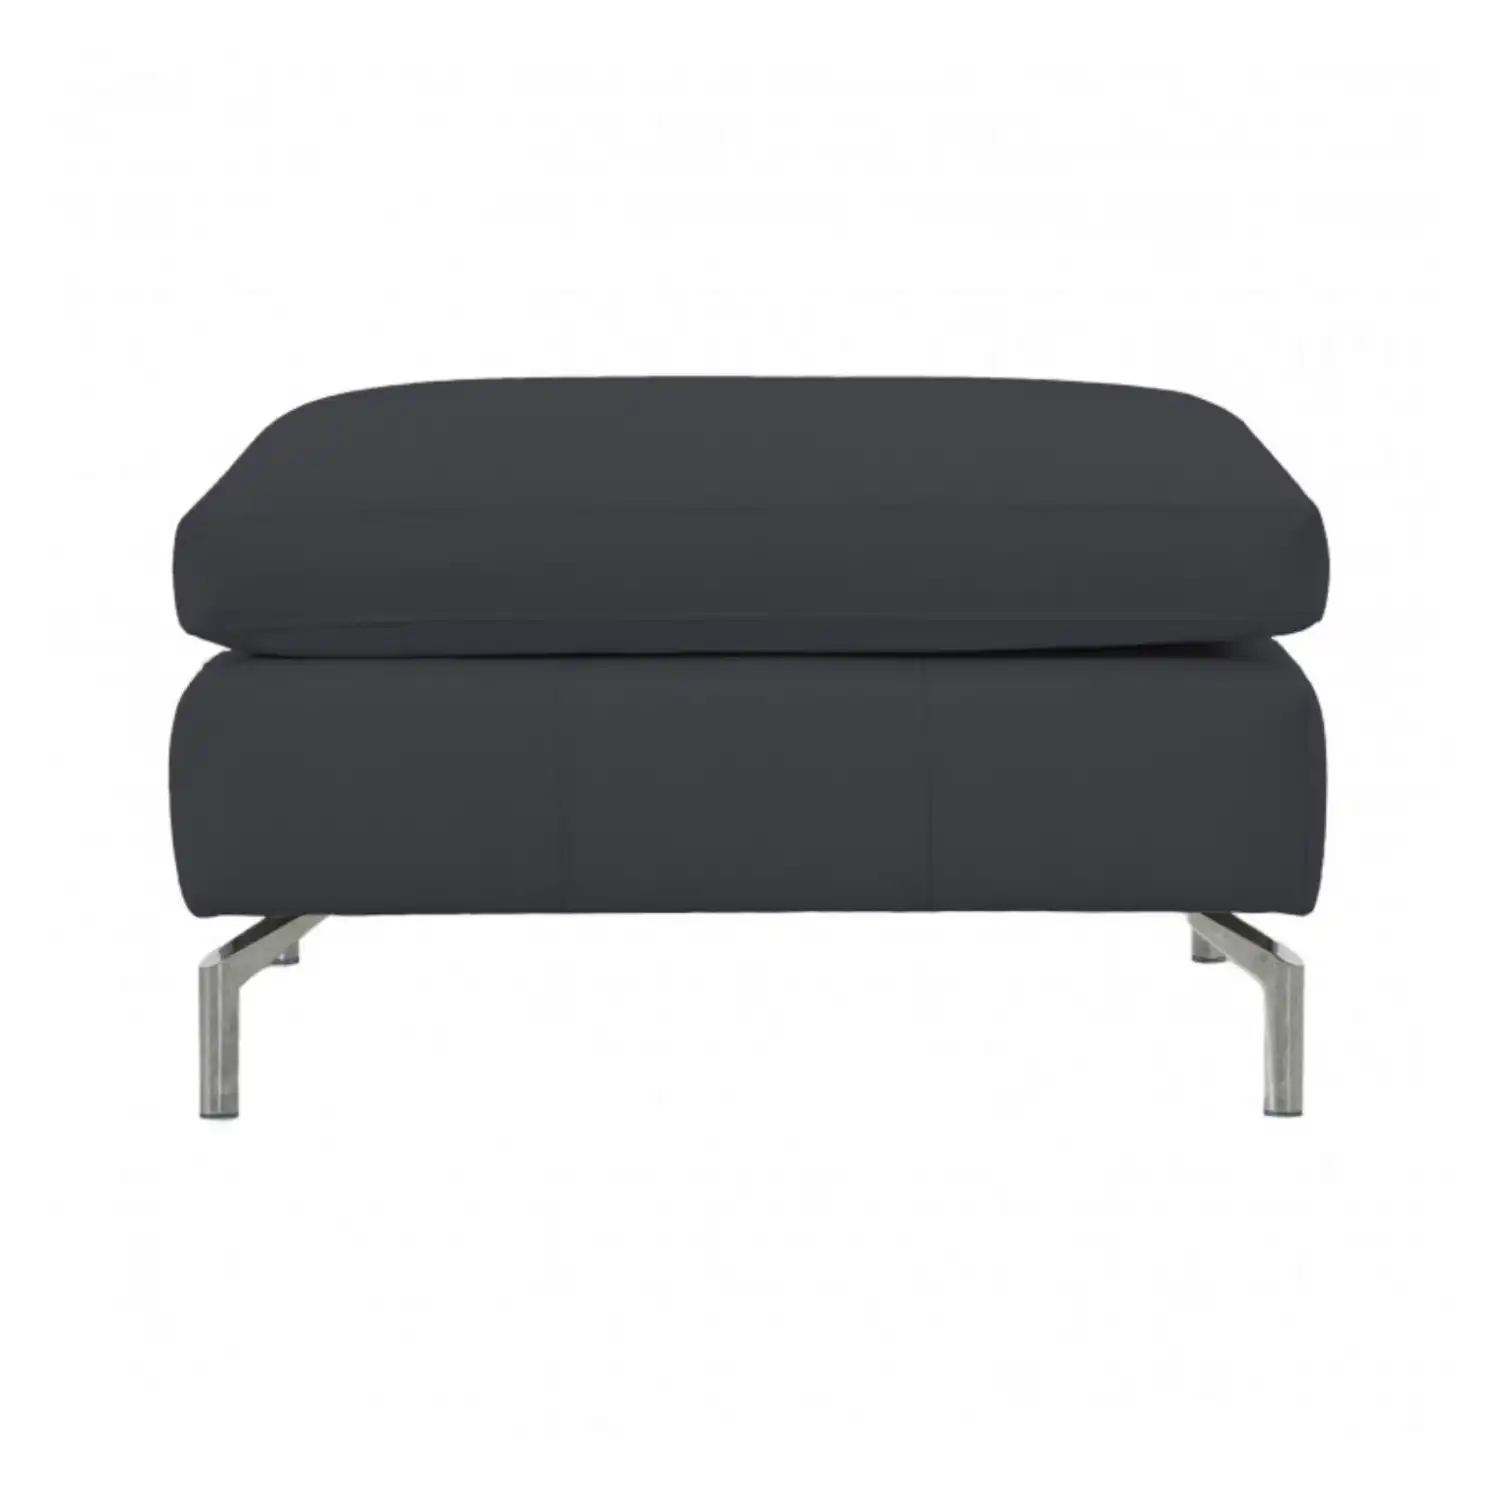 Style Sabino Jet Faux Leather Square Footstool 50x85cm